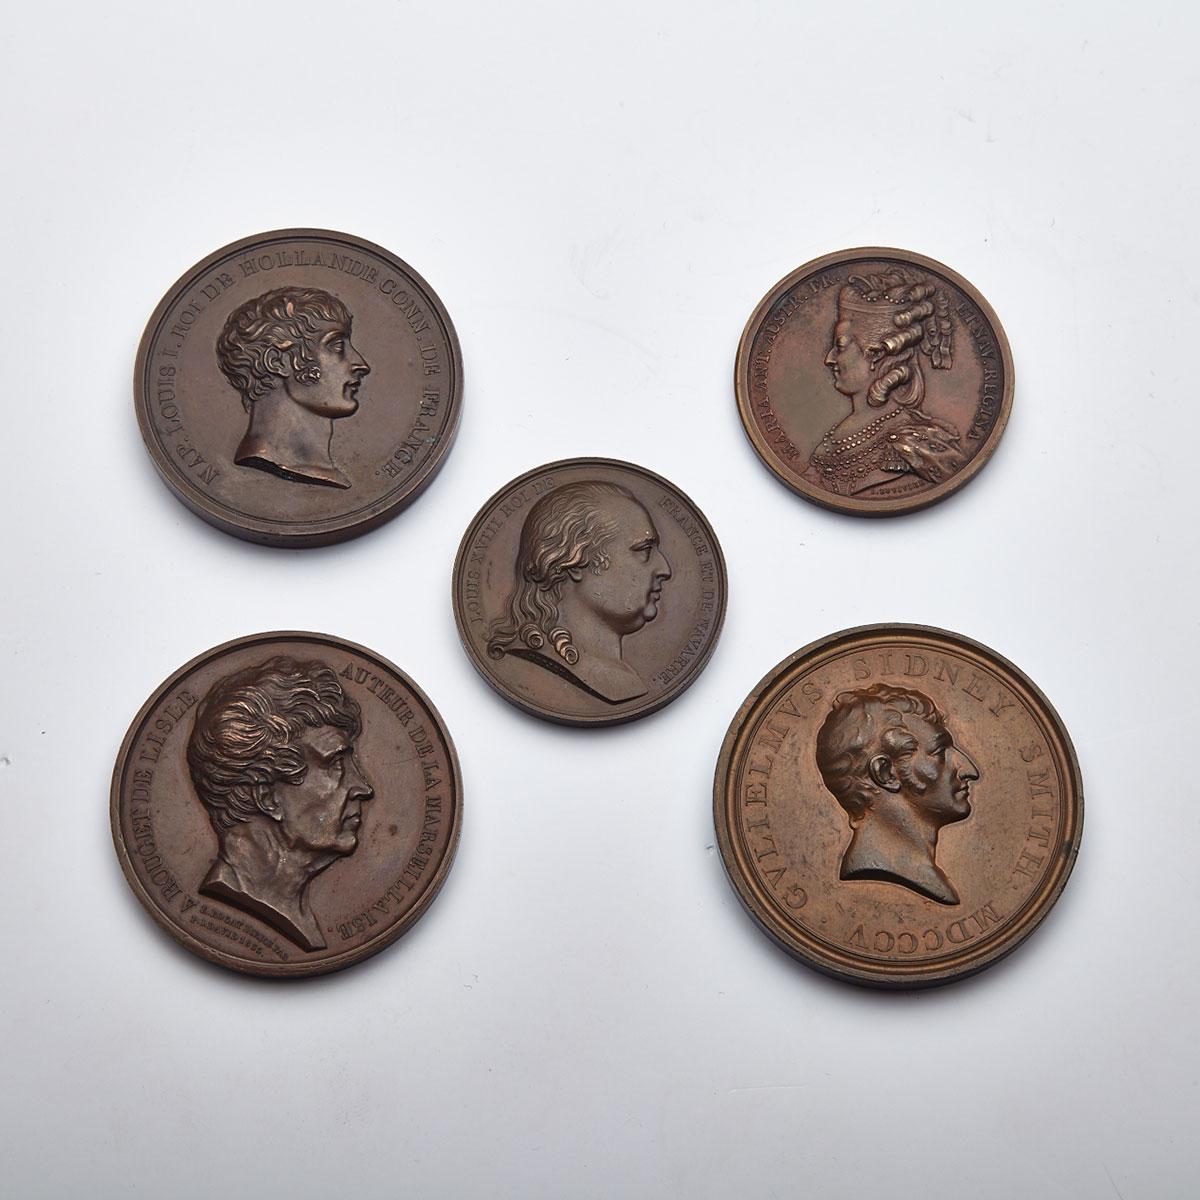 Group of Five Commemorative Medallions of Napoleonic Interest, early 19th century